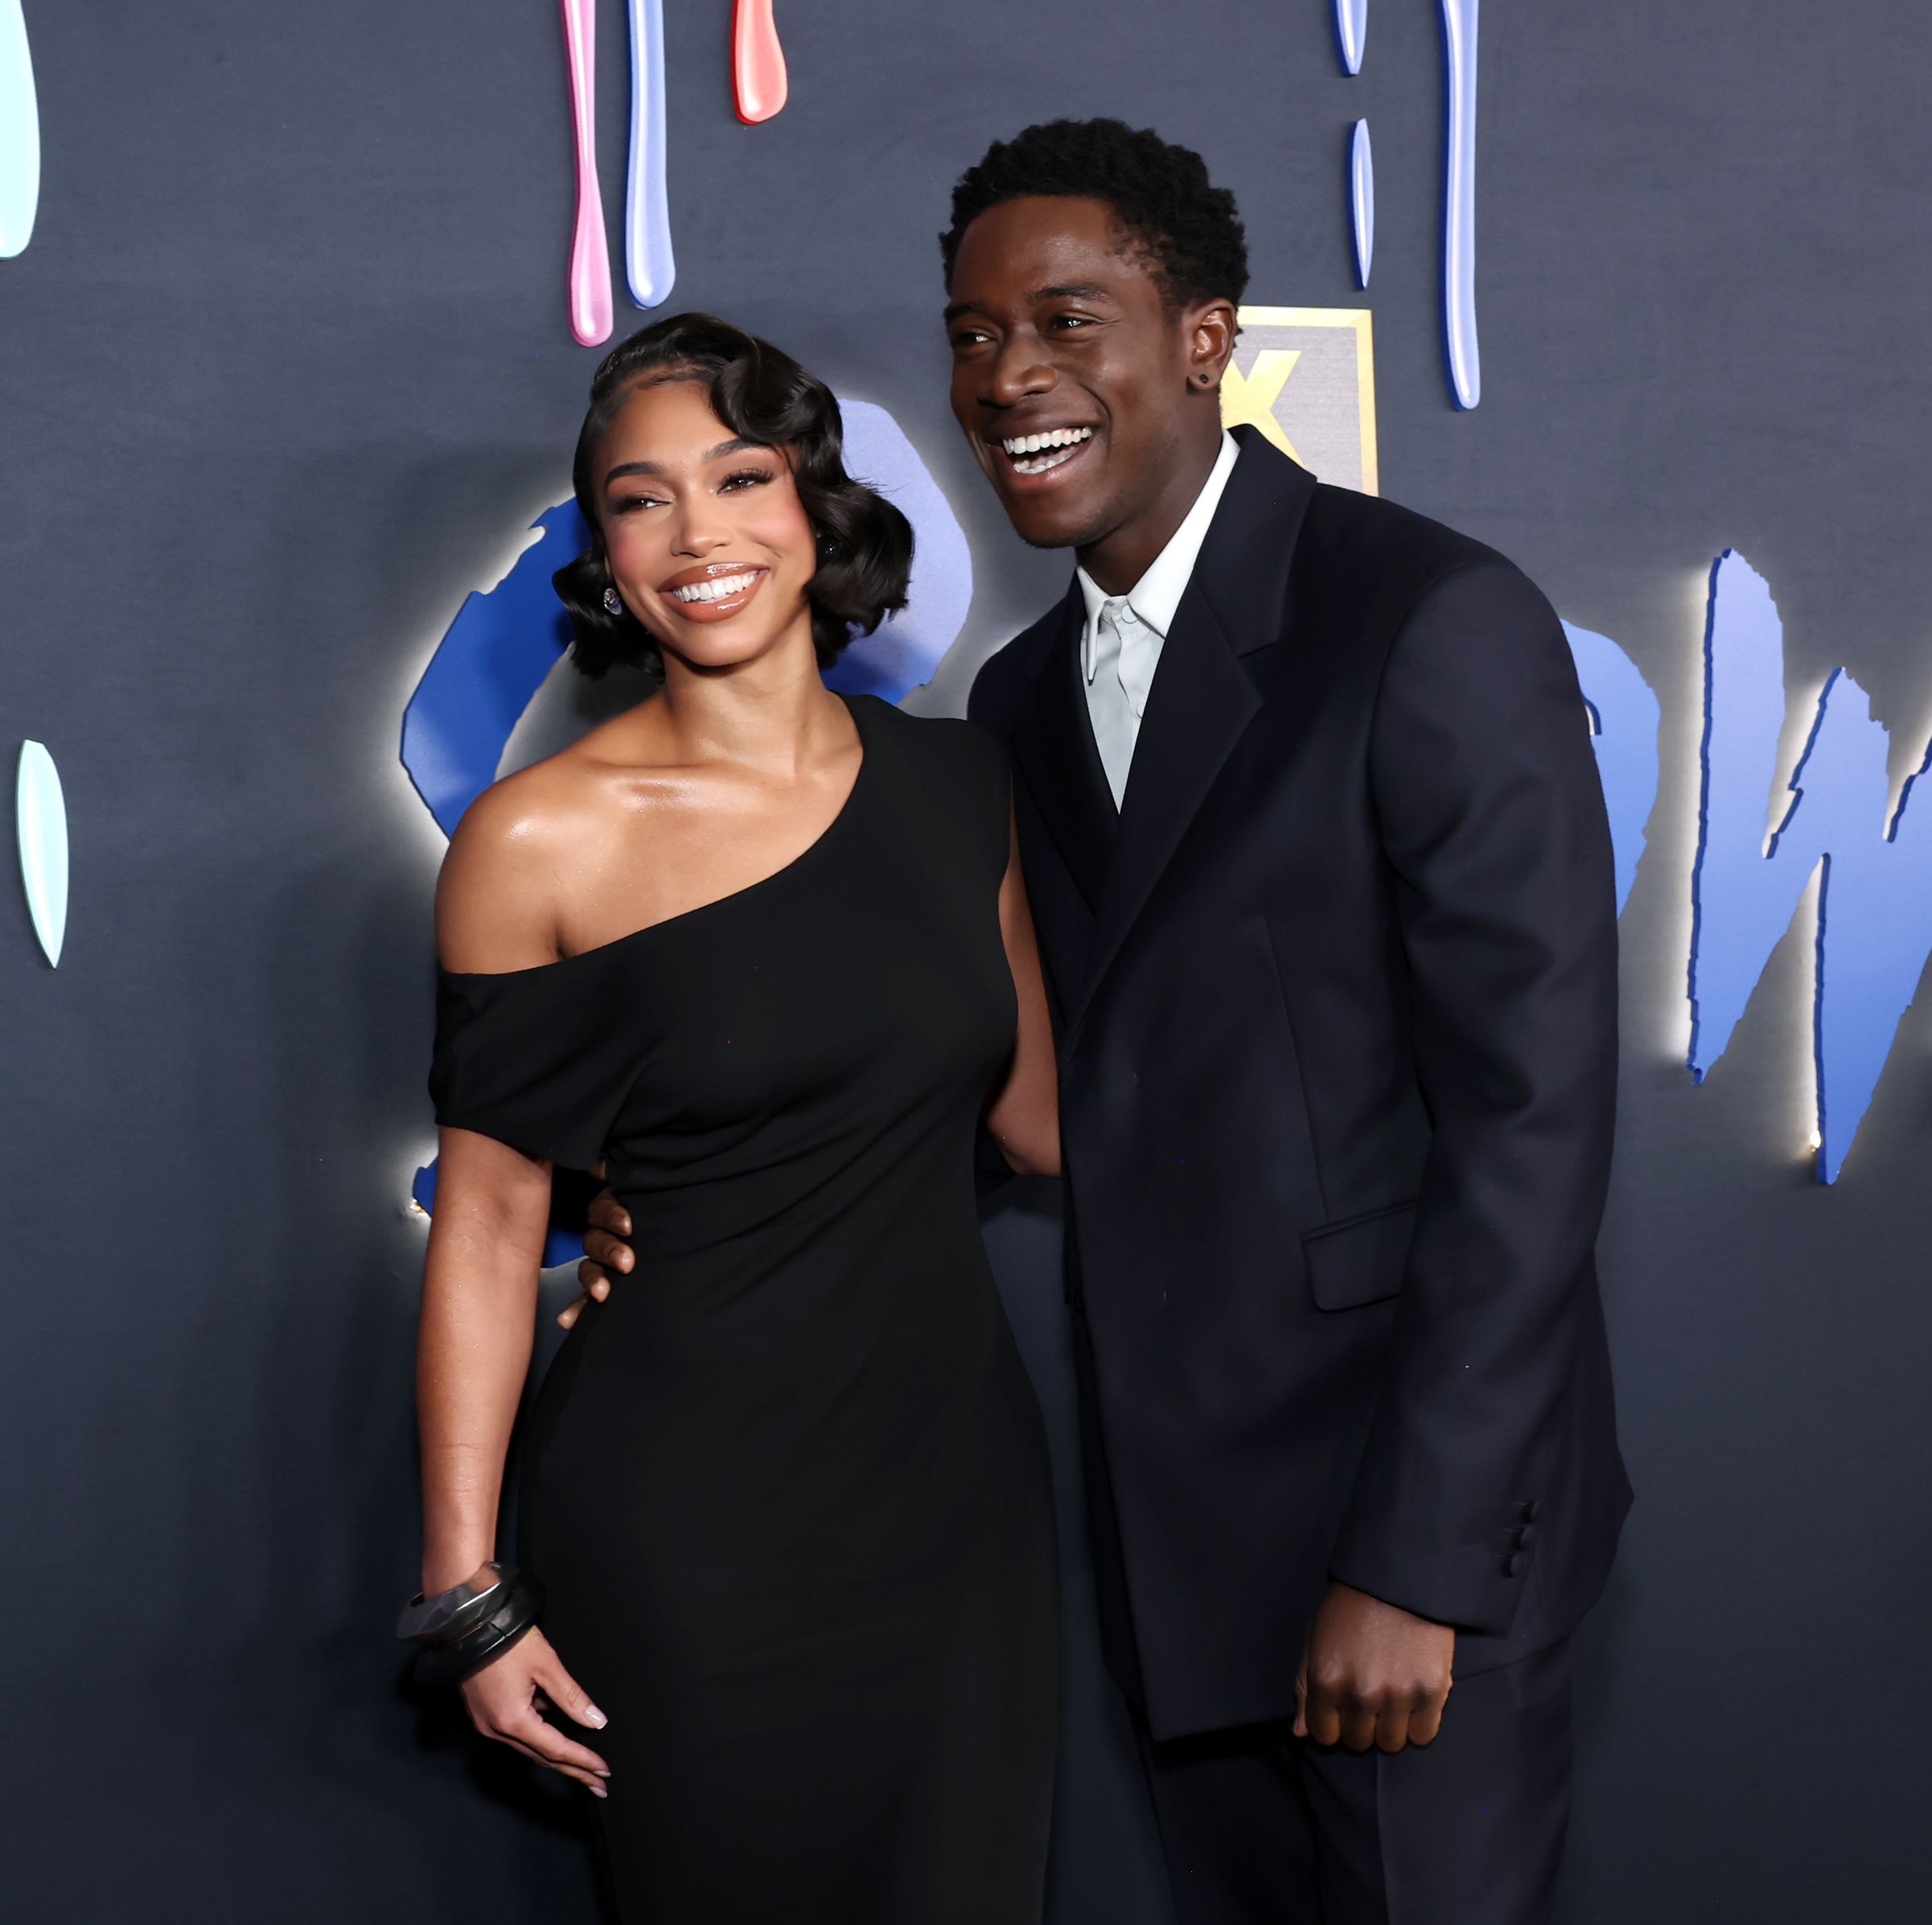 Lori Harvey and Damson Idris Just Made Their Red Carpet Debut Looking All Kinds of Cute